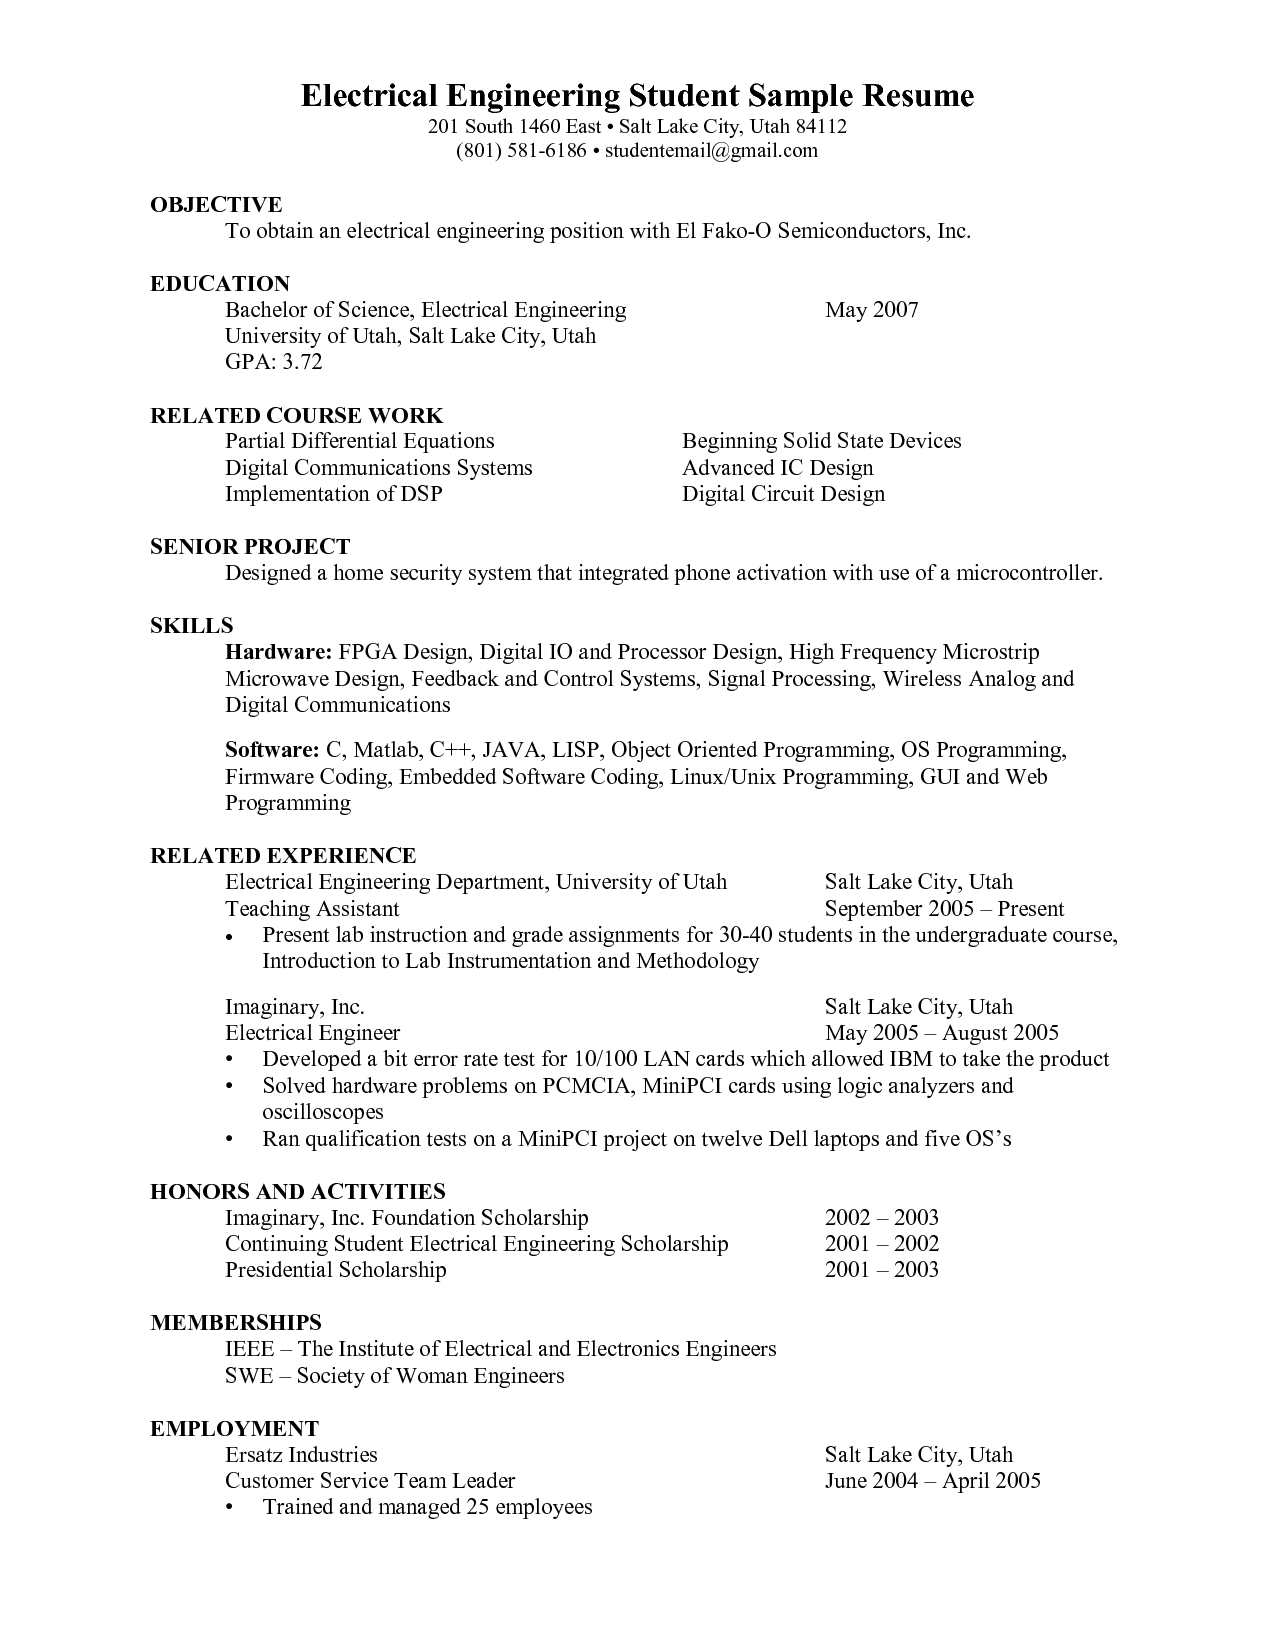 resume format for engineering students   Ecza.solinf.co